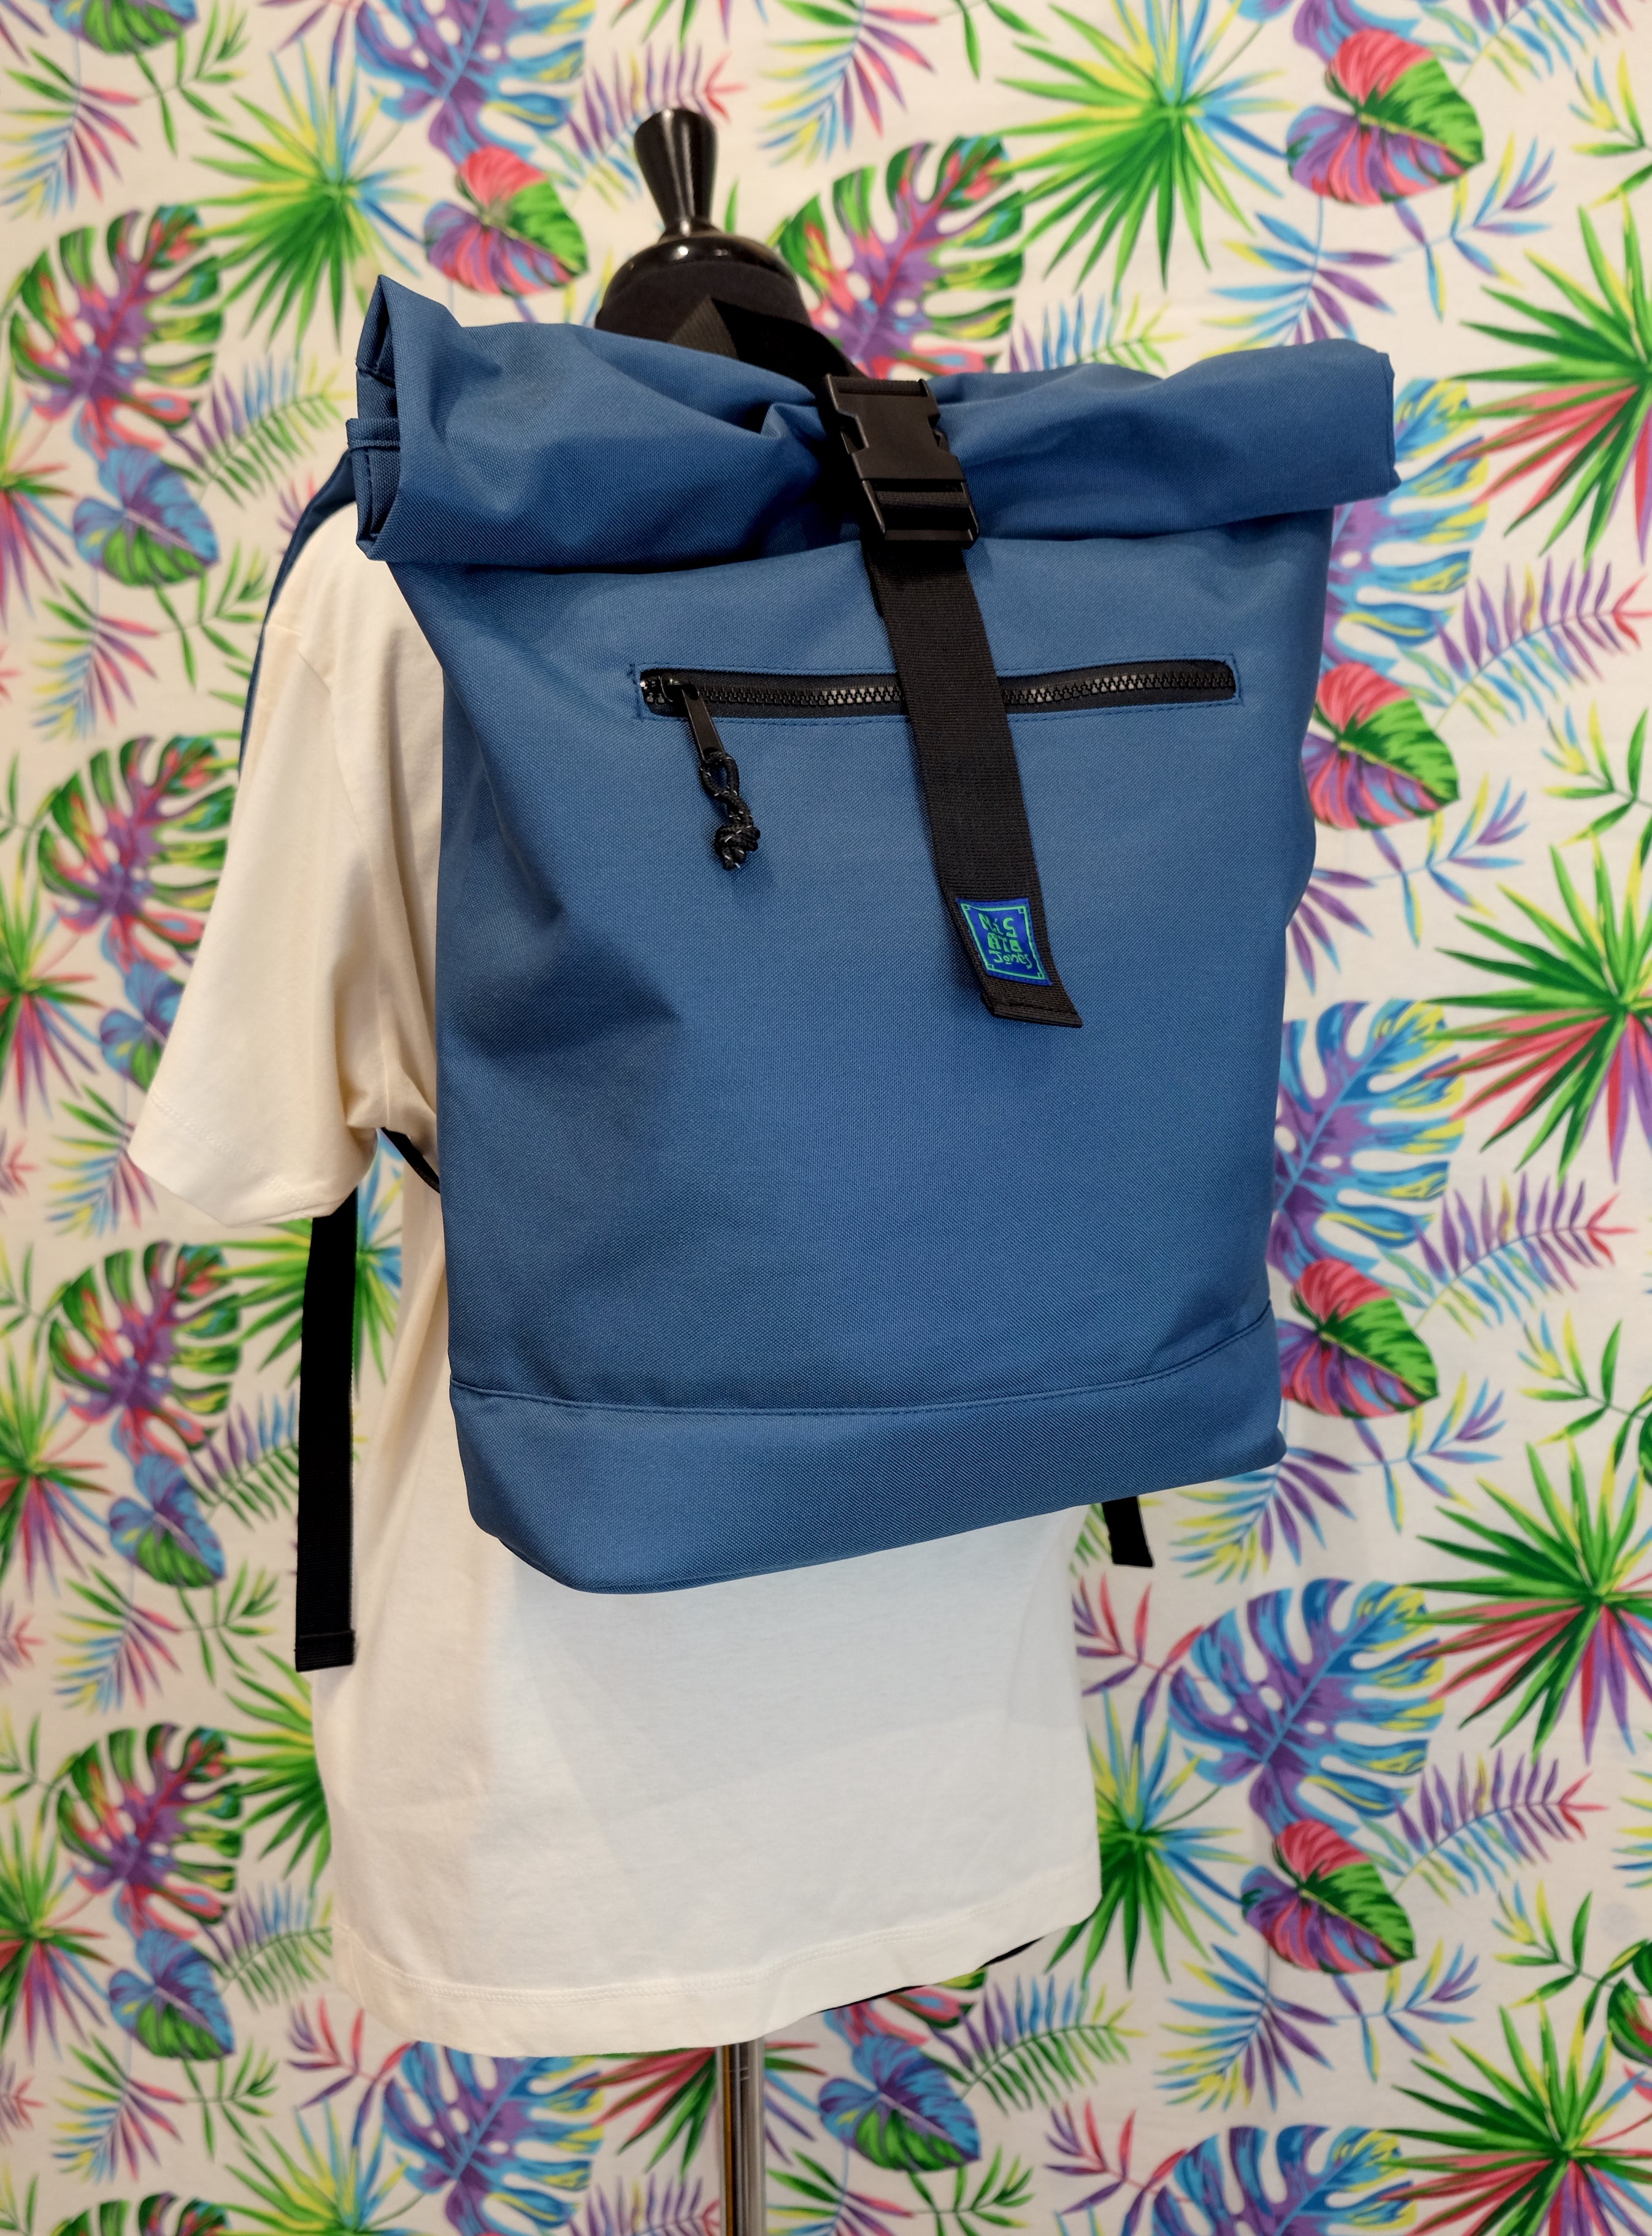 Petrol Recycled Rolled Top Backpack